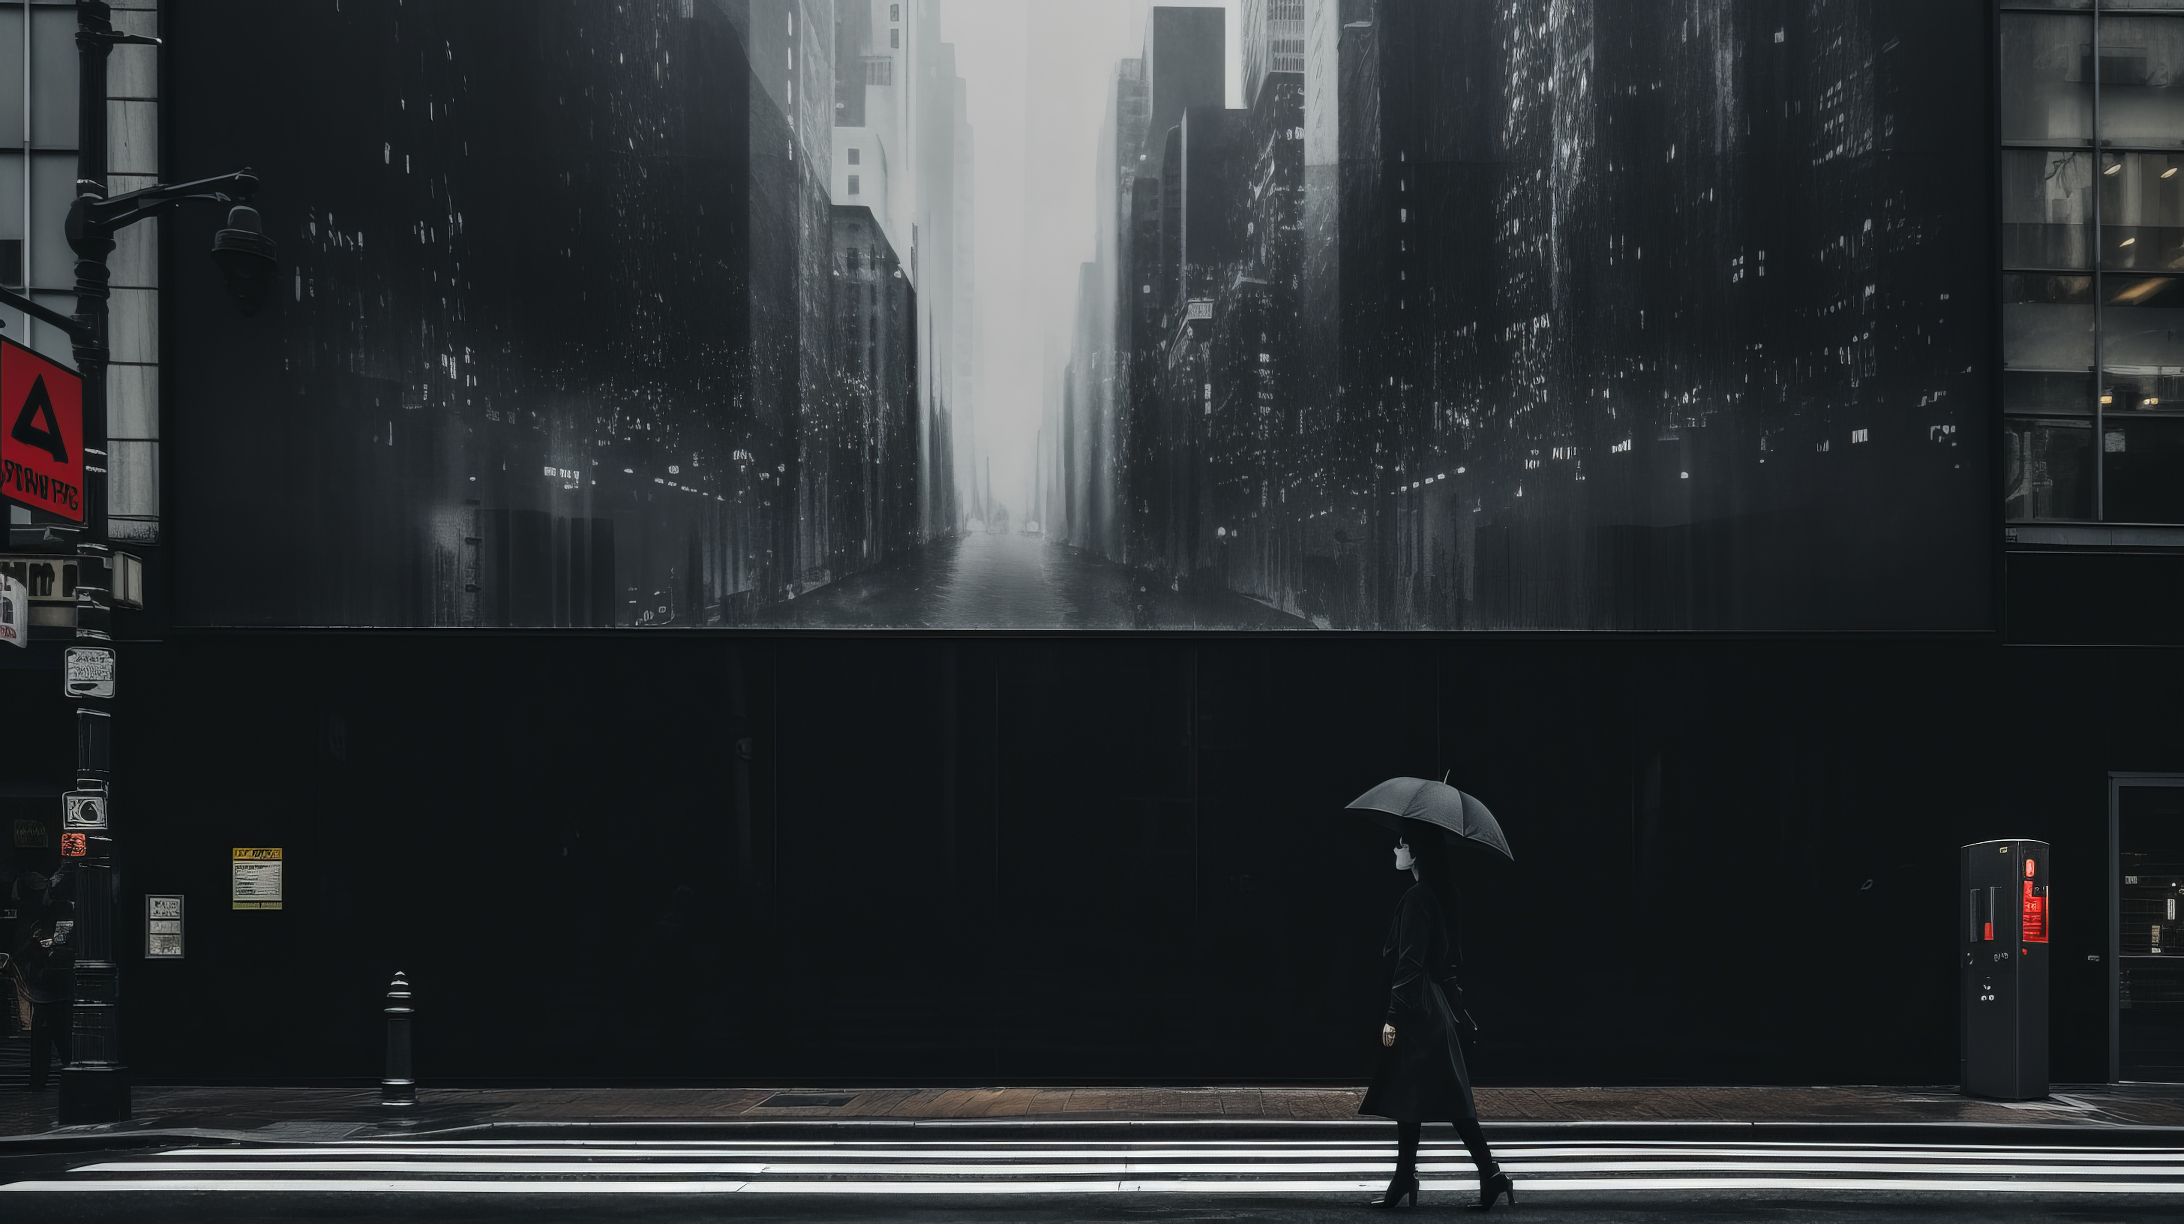 Black and white aesthetic HD wallpaper featuring a solitary figure with an umbrella walking across a city street with towering skyscrapers shrouded in mist.